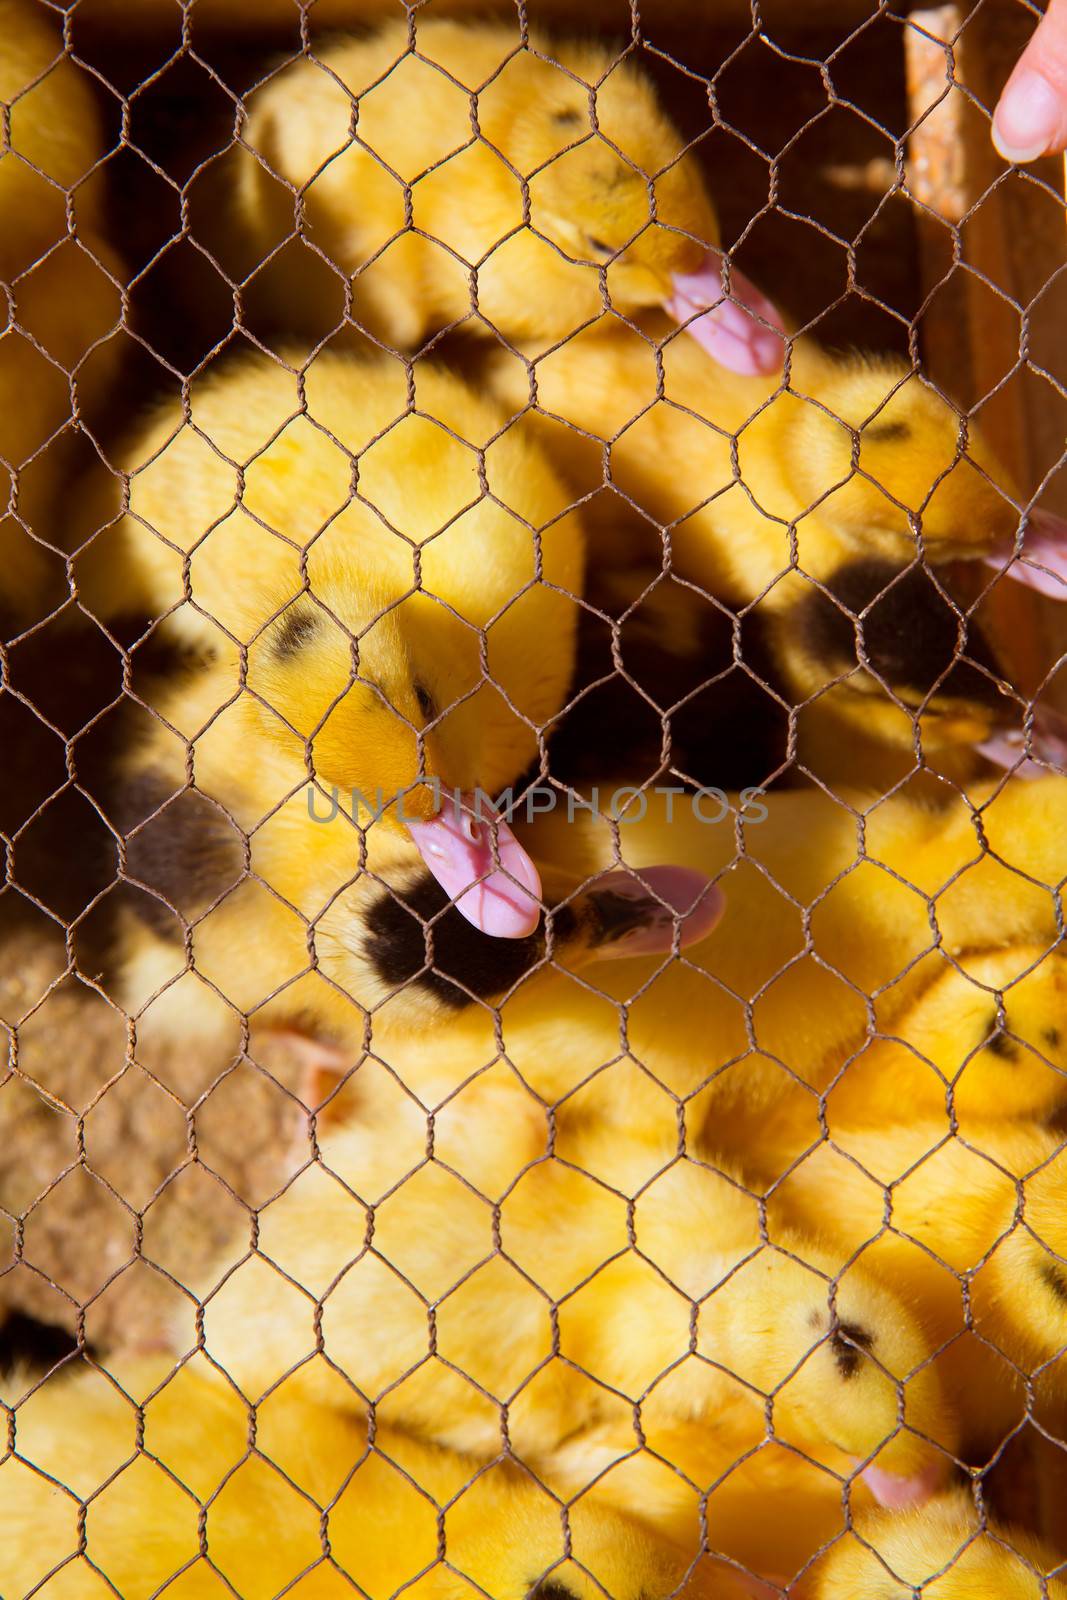 ducklings in yellow and black under wire mesh by lunamarina